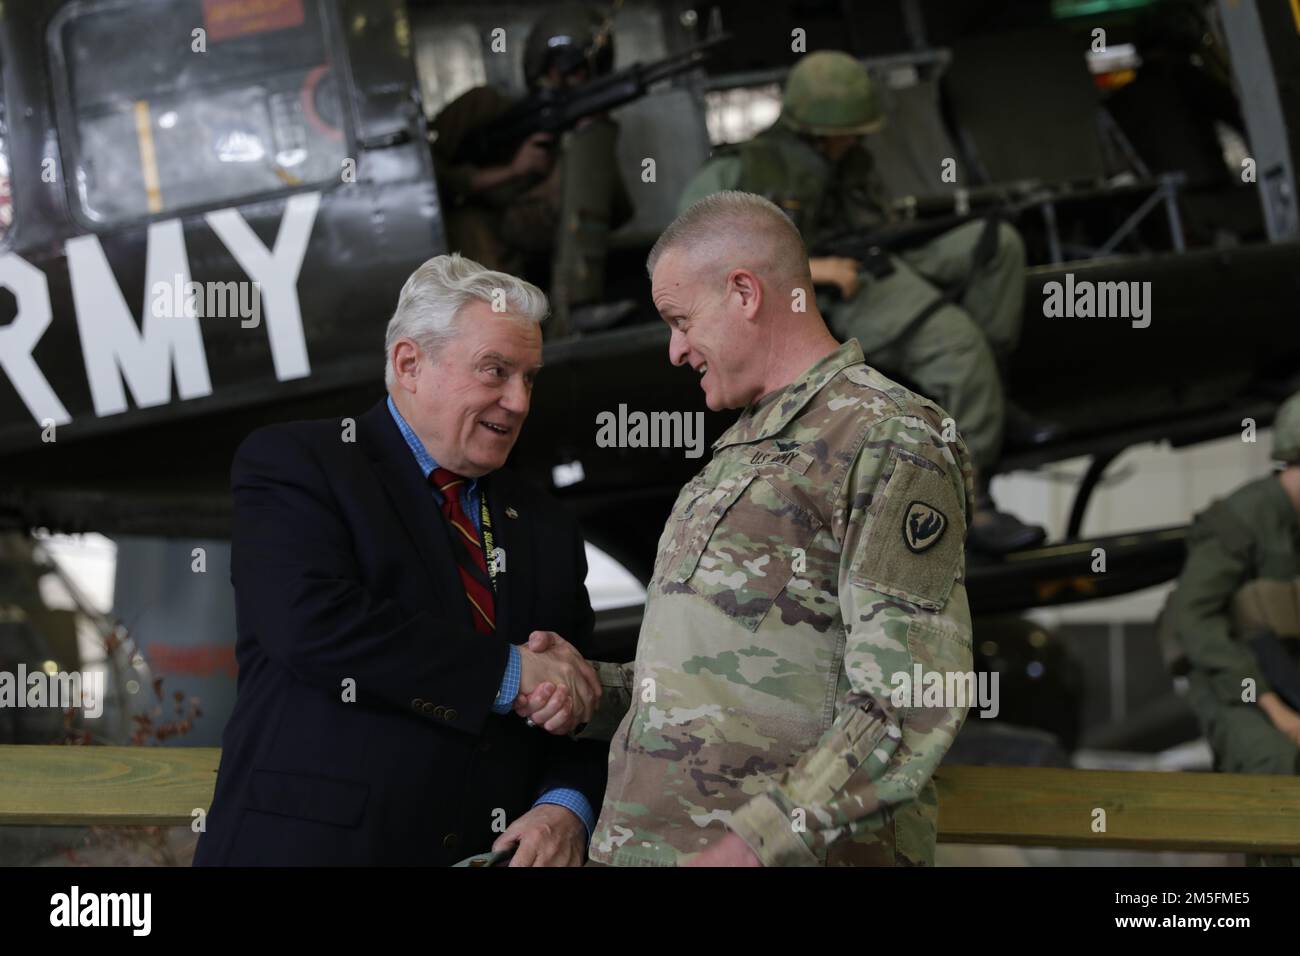 Thomas Green and Command Sgt. Maj. Charles Hancock shake hands in front of a Bell UH-1 Iroquois static display at the U.S. Army Aviation Museum, Fort Rucker, Alabama, March 14, 2022. Stock Photo